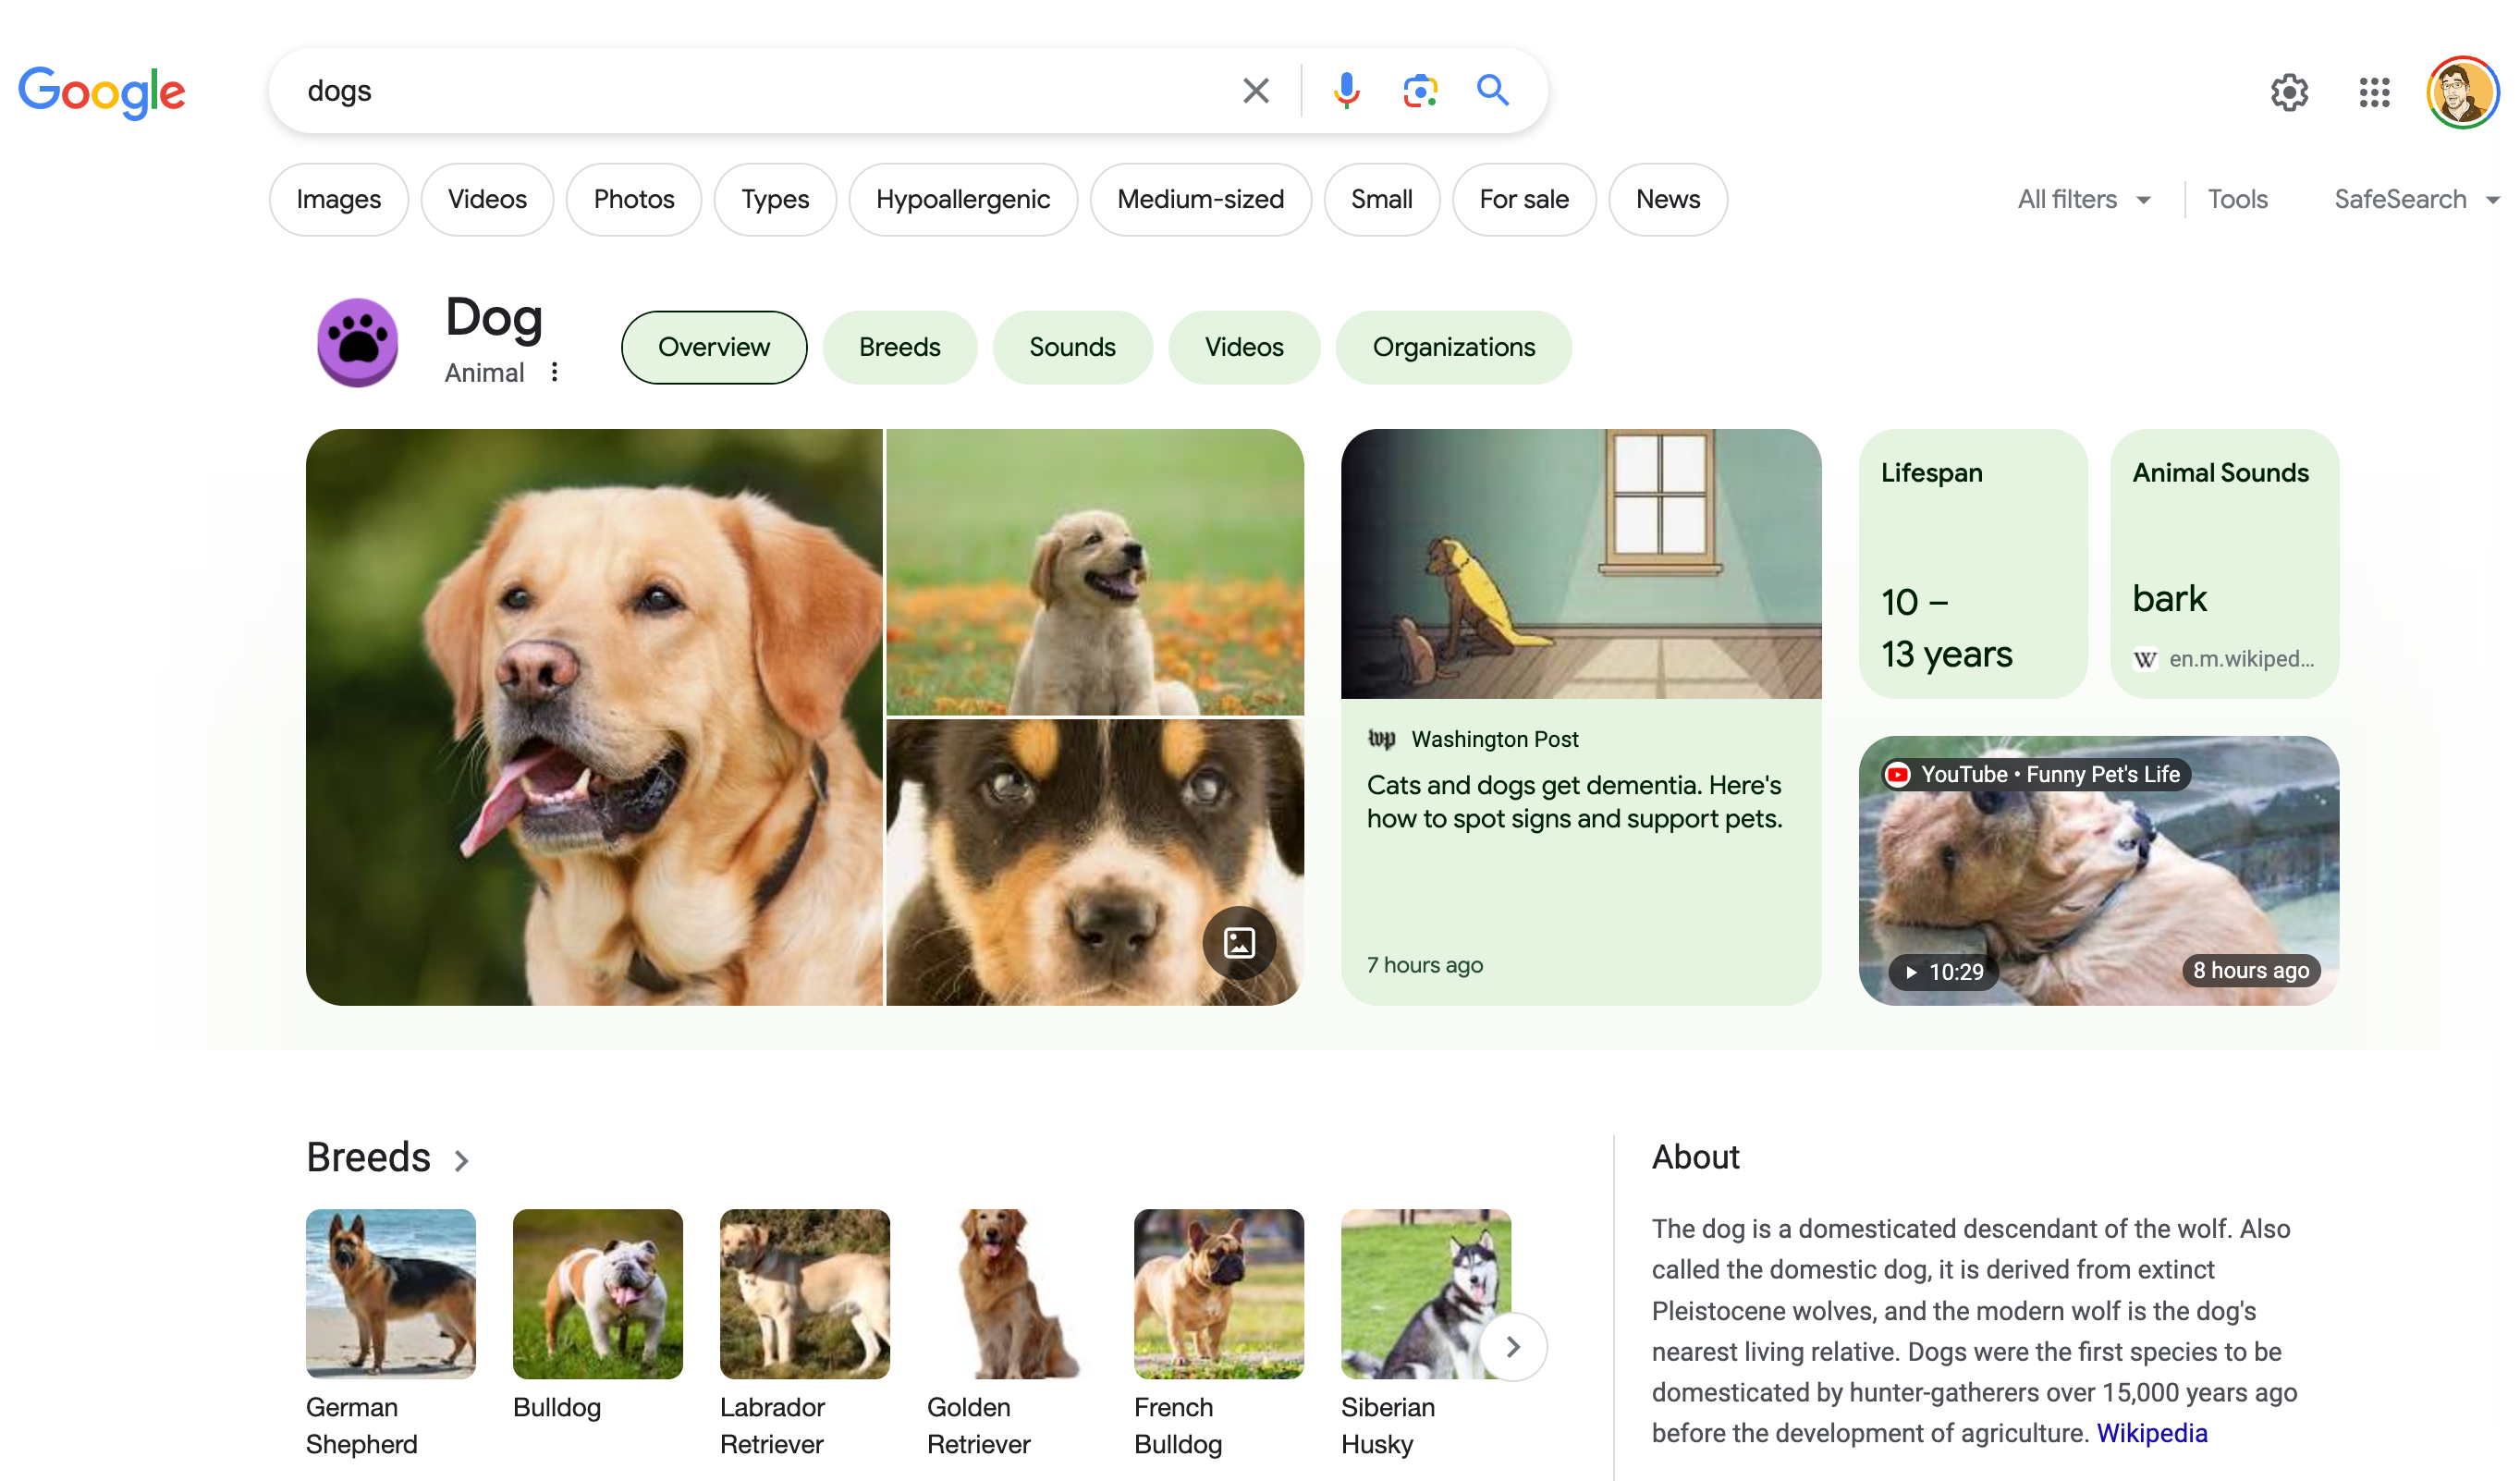 A Google search result for 'dogs'. There are three main sections of the cropped screenshot. The first is the search input. The second is the knowledge panel. The third is a carousel of dog breeds. The search input shows the search term 'dogs', as well as filters for 'Images', 'Videos', 'Photos', 'Types', 'Hypoallergenic', 'Medium-sized', 'Small', 'For sale', and 'News'. It also shows I am logged into Google by displaying my avatar. The knowledge panel section consists of three main areas, a title and tab navigation, a grid of photos, and a grid of multimedia information. The title and tab navigation shows a button with a dog pawprint on it, the title of 'Dog', and the subtitle of 'Animal' Following subtitle is three small vertically-stacked dots. After the dots are five tabs that read, 'Overview', 'Breeds', 'Sounds', 'Videos', and Organizations'. The 'Overview' tab is active. The photo grid of photos features a large photo of a close-up of a goofy-looking Labrodor Retriever's face. Following it are two smaller photos for a happy-looking Golden Retriever puppy basking in a field, and a close-up of a Bernese Mountain Dog puppy's face staring intently at the camera. Both puppies are adorable. Above the Bernese Mountain Dog puppy is an icon of a photo indicating more photo results are present. The multimedia information section features a preview for an article published on the Washington Post with a depressing title of 'Cats and dogs get dementia. Here's hot to spot signs and support pets.' The article was posted seven hours ago, and features an illustration of a depressed-looking dog and cat sitting next to each other in the gloom, right outside the range of a sunny window. Following that are smaller information areas that communicate that the lifespan is 10–13 years, and that 'Animal Sounds' is 'bark' as sourced by a mobile Wikipedia article URL. The URL is truncated so its title cannot be determined. Last in this section is a YouTube video preview thumbnail with the title of 'YouTube · Funny Pet's Life. The video's thumbnail depicts another Golden Retriever, thise one is in a pool and whose head is leisurely resting on the pool's brick side. The video has a running time of 10 minutes and twenty nine seconds and was posted 8 hours ago. The listed dog breeds are a German Shepard, a Bulldog, a Labrodor Retriever, a Golden Retriever, a French Bulldog, and a Siberian Husky. After the carousel is a section titled 'About' with a high-level description of what a dog is sourced from Wikipedia.